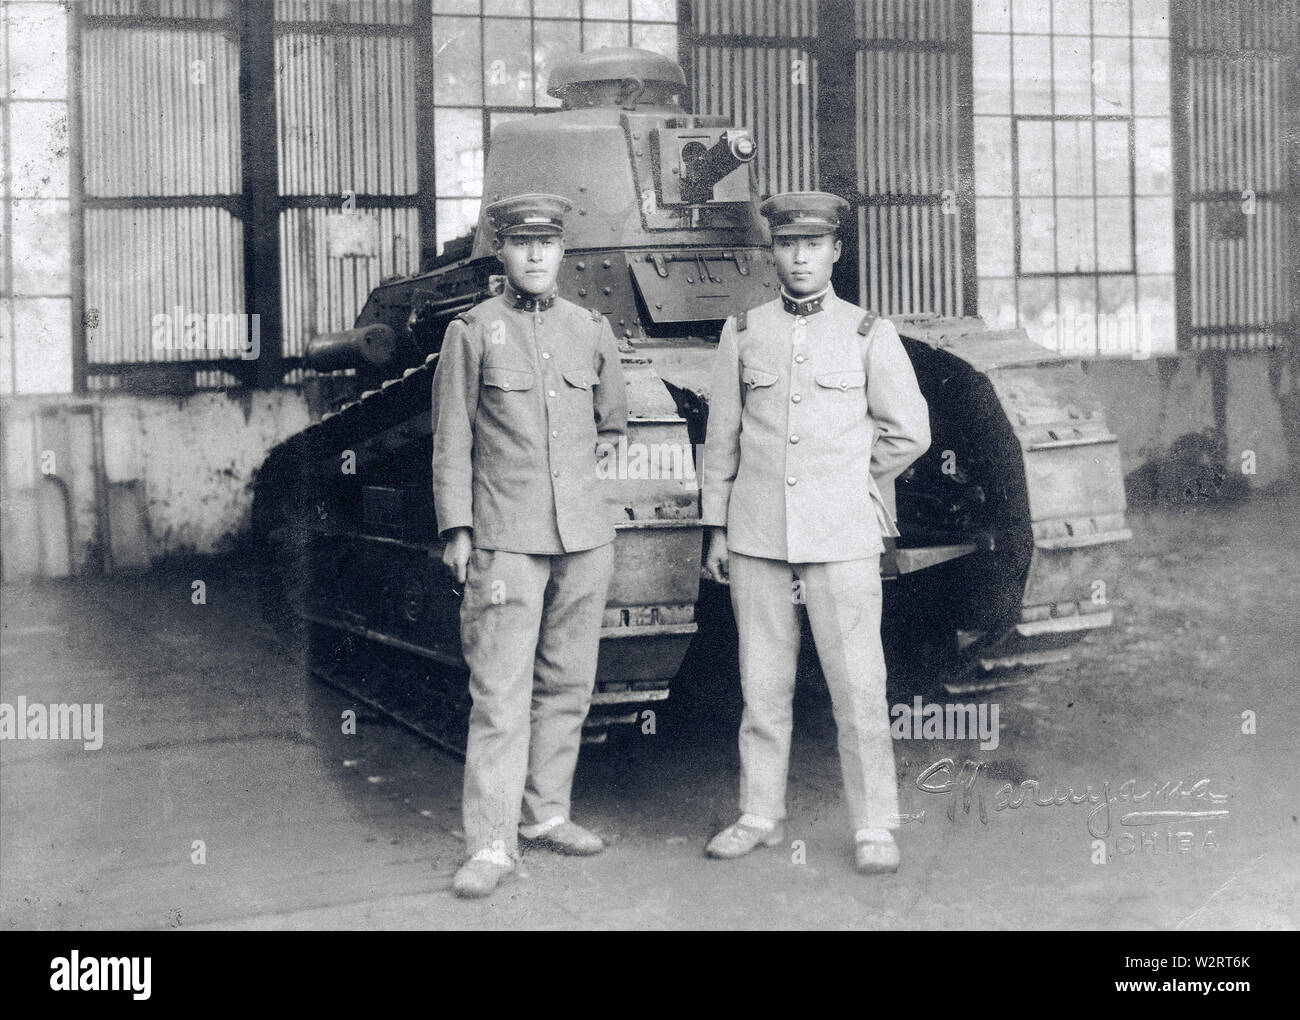 [ 1930s Japan - Japanese Soldiers and French Tank ] —   Two Japanese soldiers stand in front of a French Renault FT-17 light infantry tank, one the most revolutionary tank designs in history.   Japan imported 13 FT-17's in 1919 (Taisho 8), which were used in the Manchurian Incident (1931-1932) and for training. The French guns were replaced with Japanese armament.  20th century vintage gelatin silver print. Stock Photo